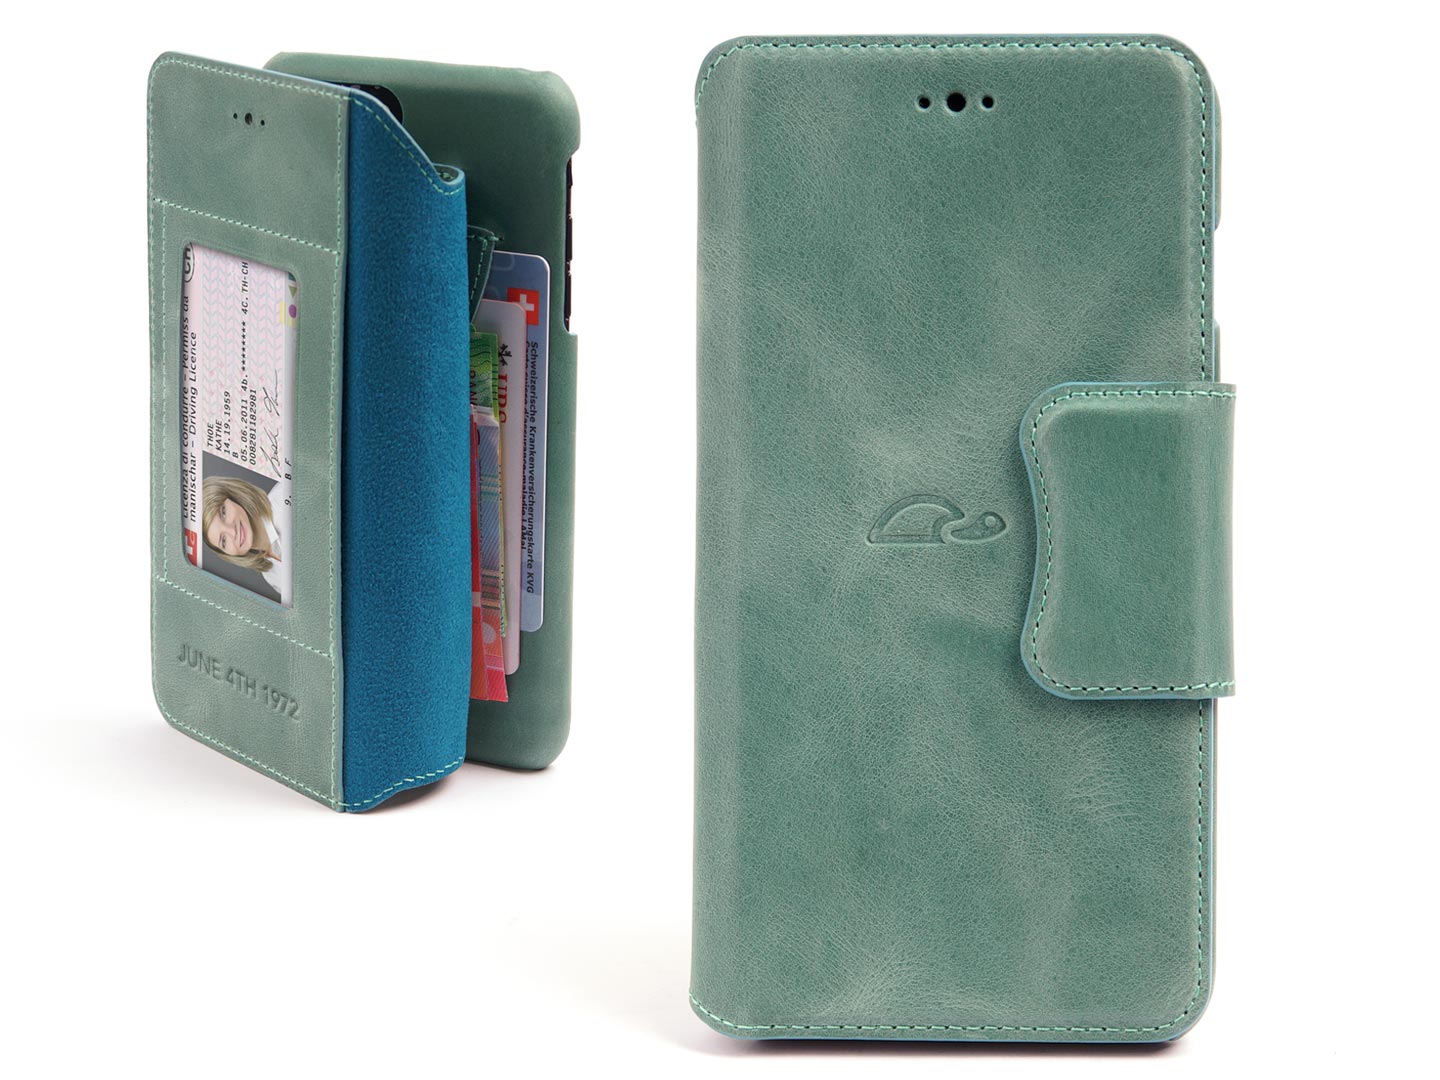 Leather wallet case iPhone 7 / 8 Plus - turquoise green - Carapaz